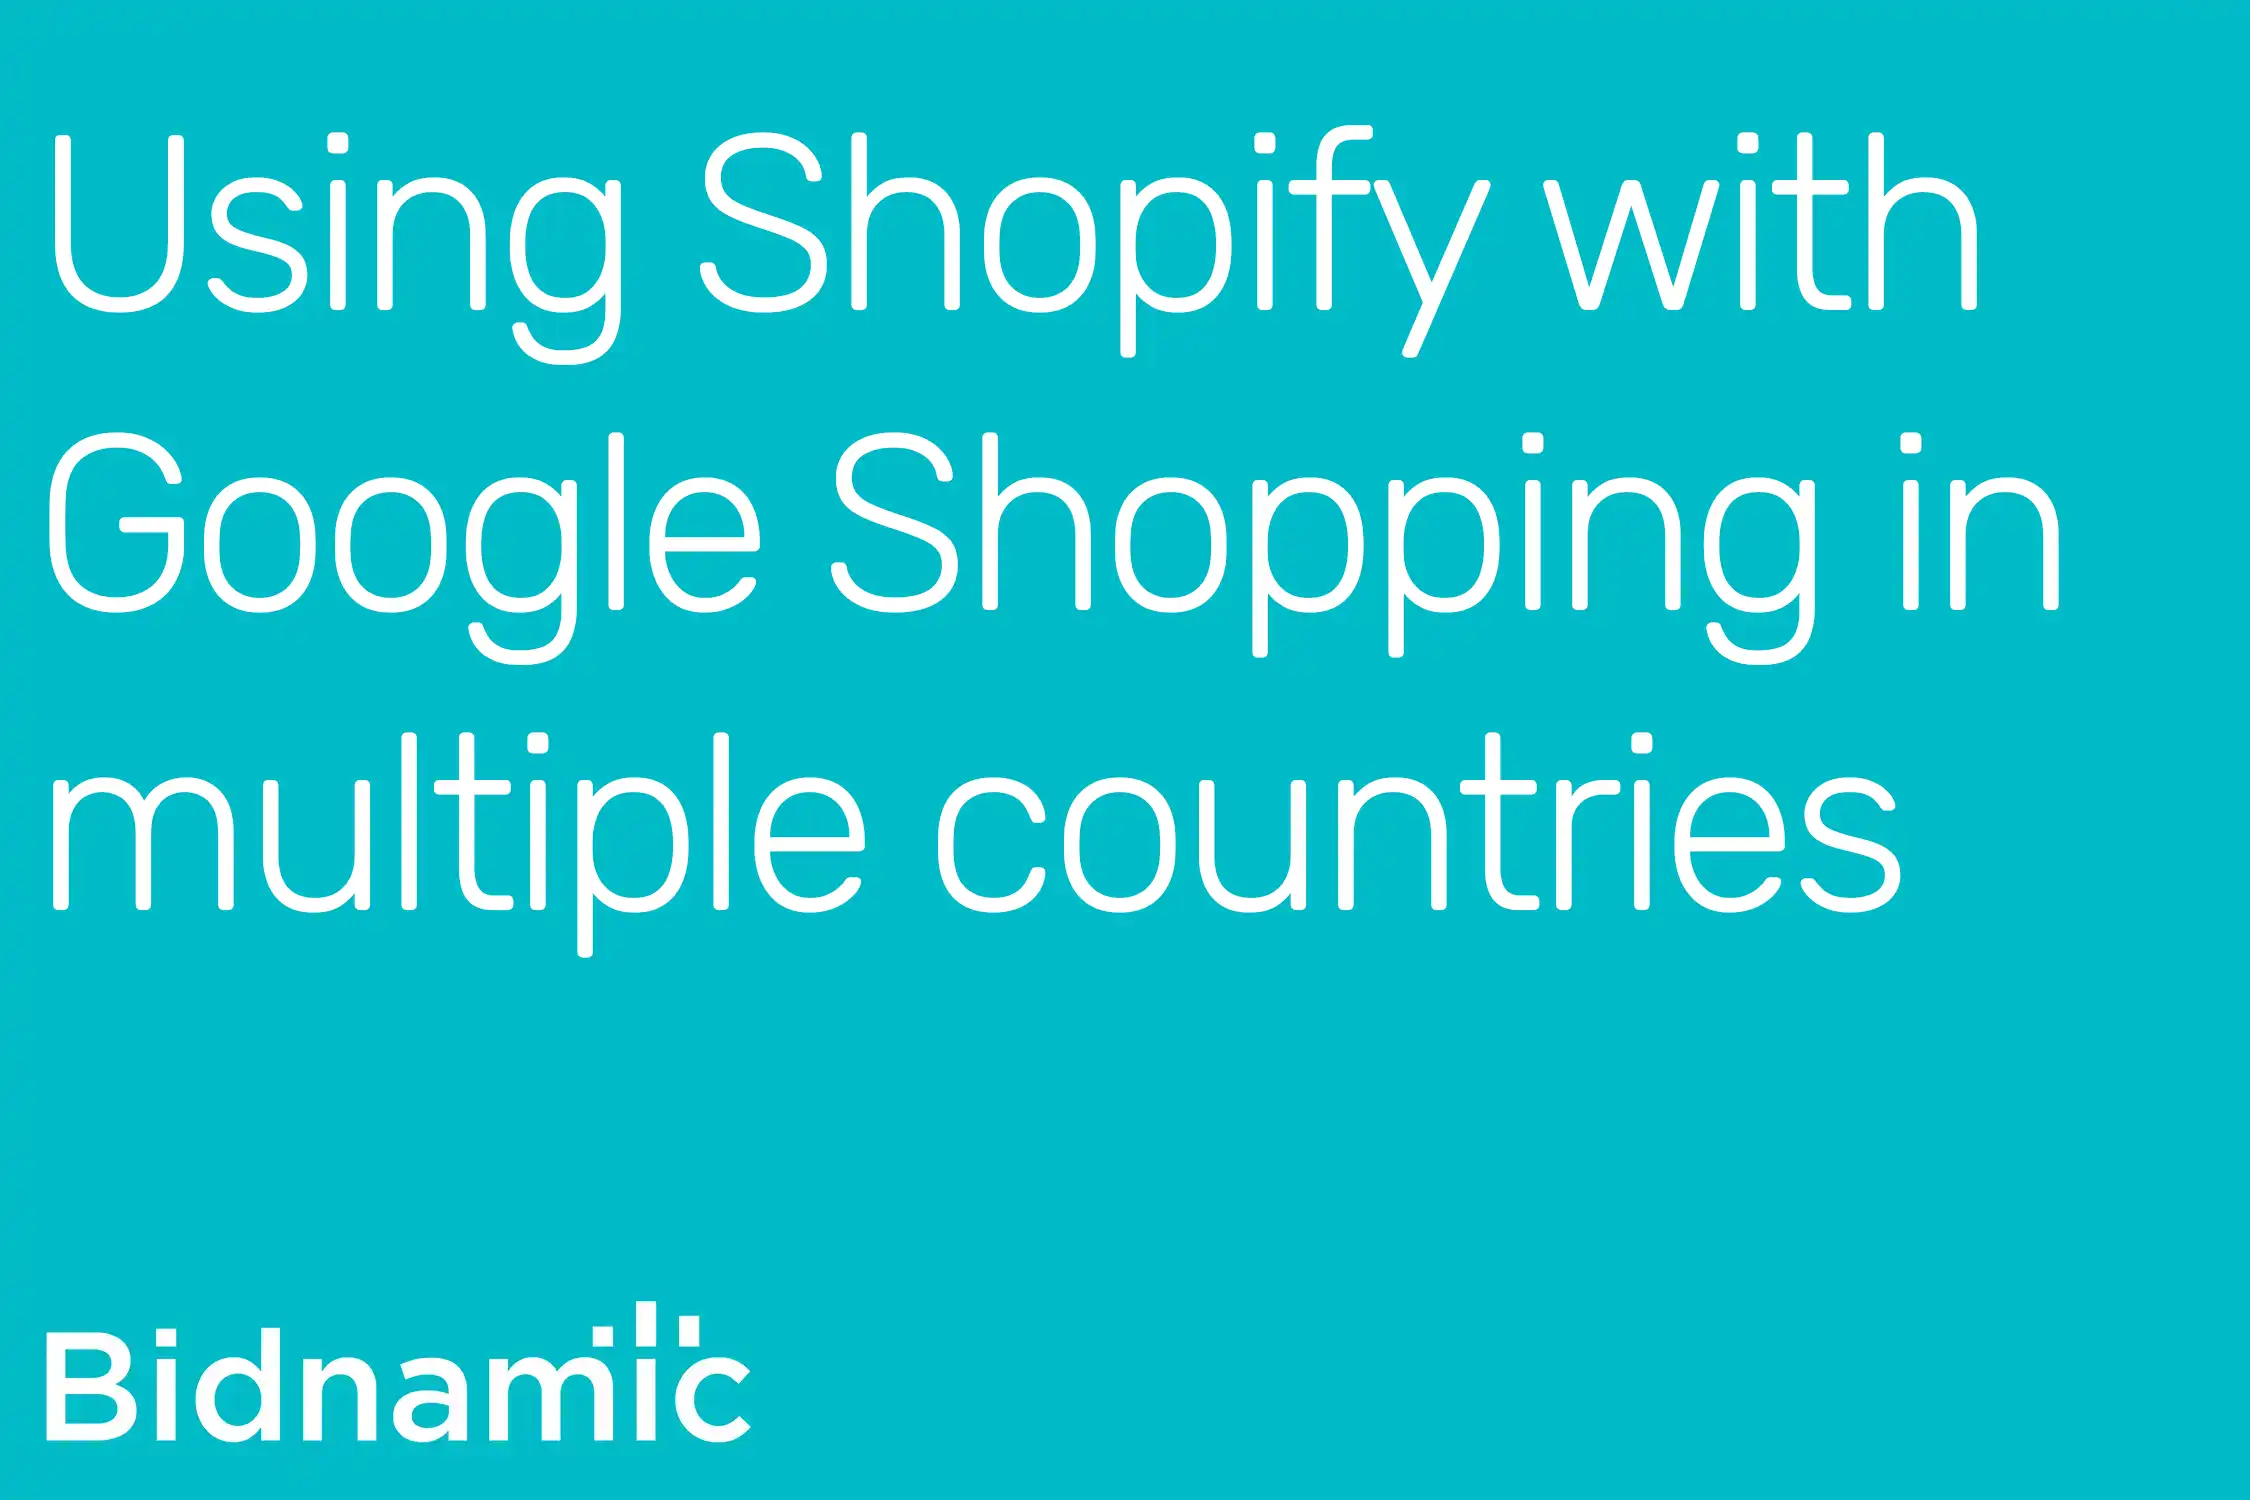 Using Shopify in multiple countries